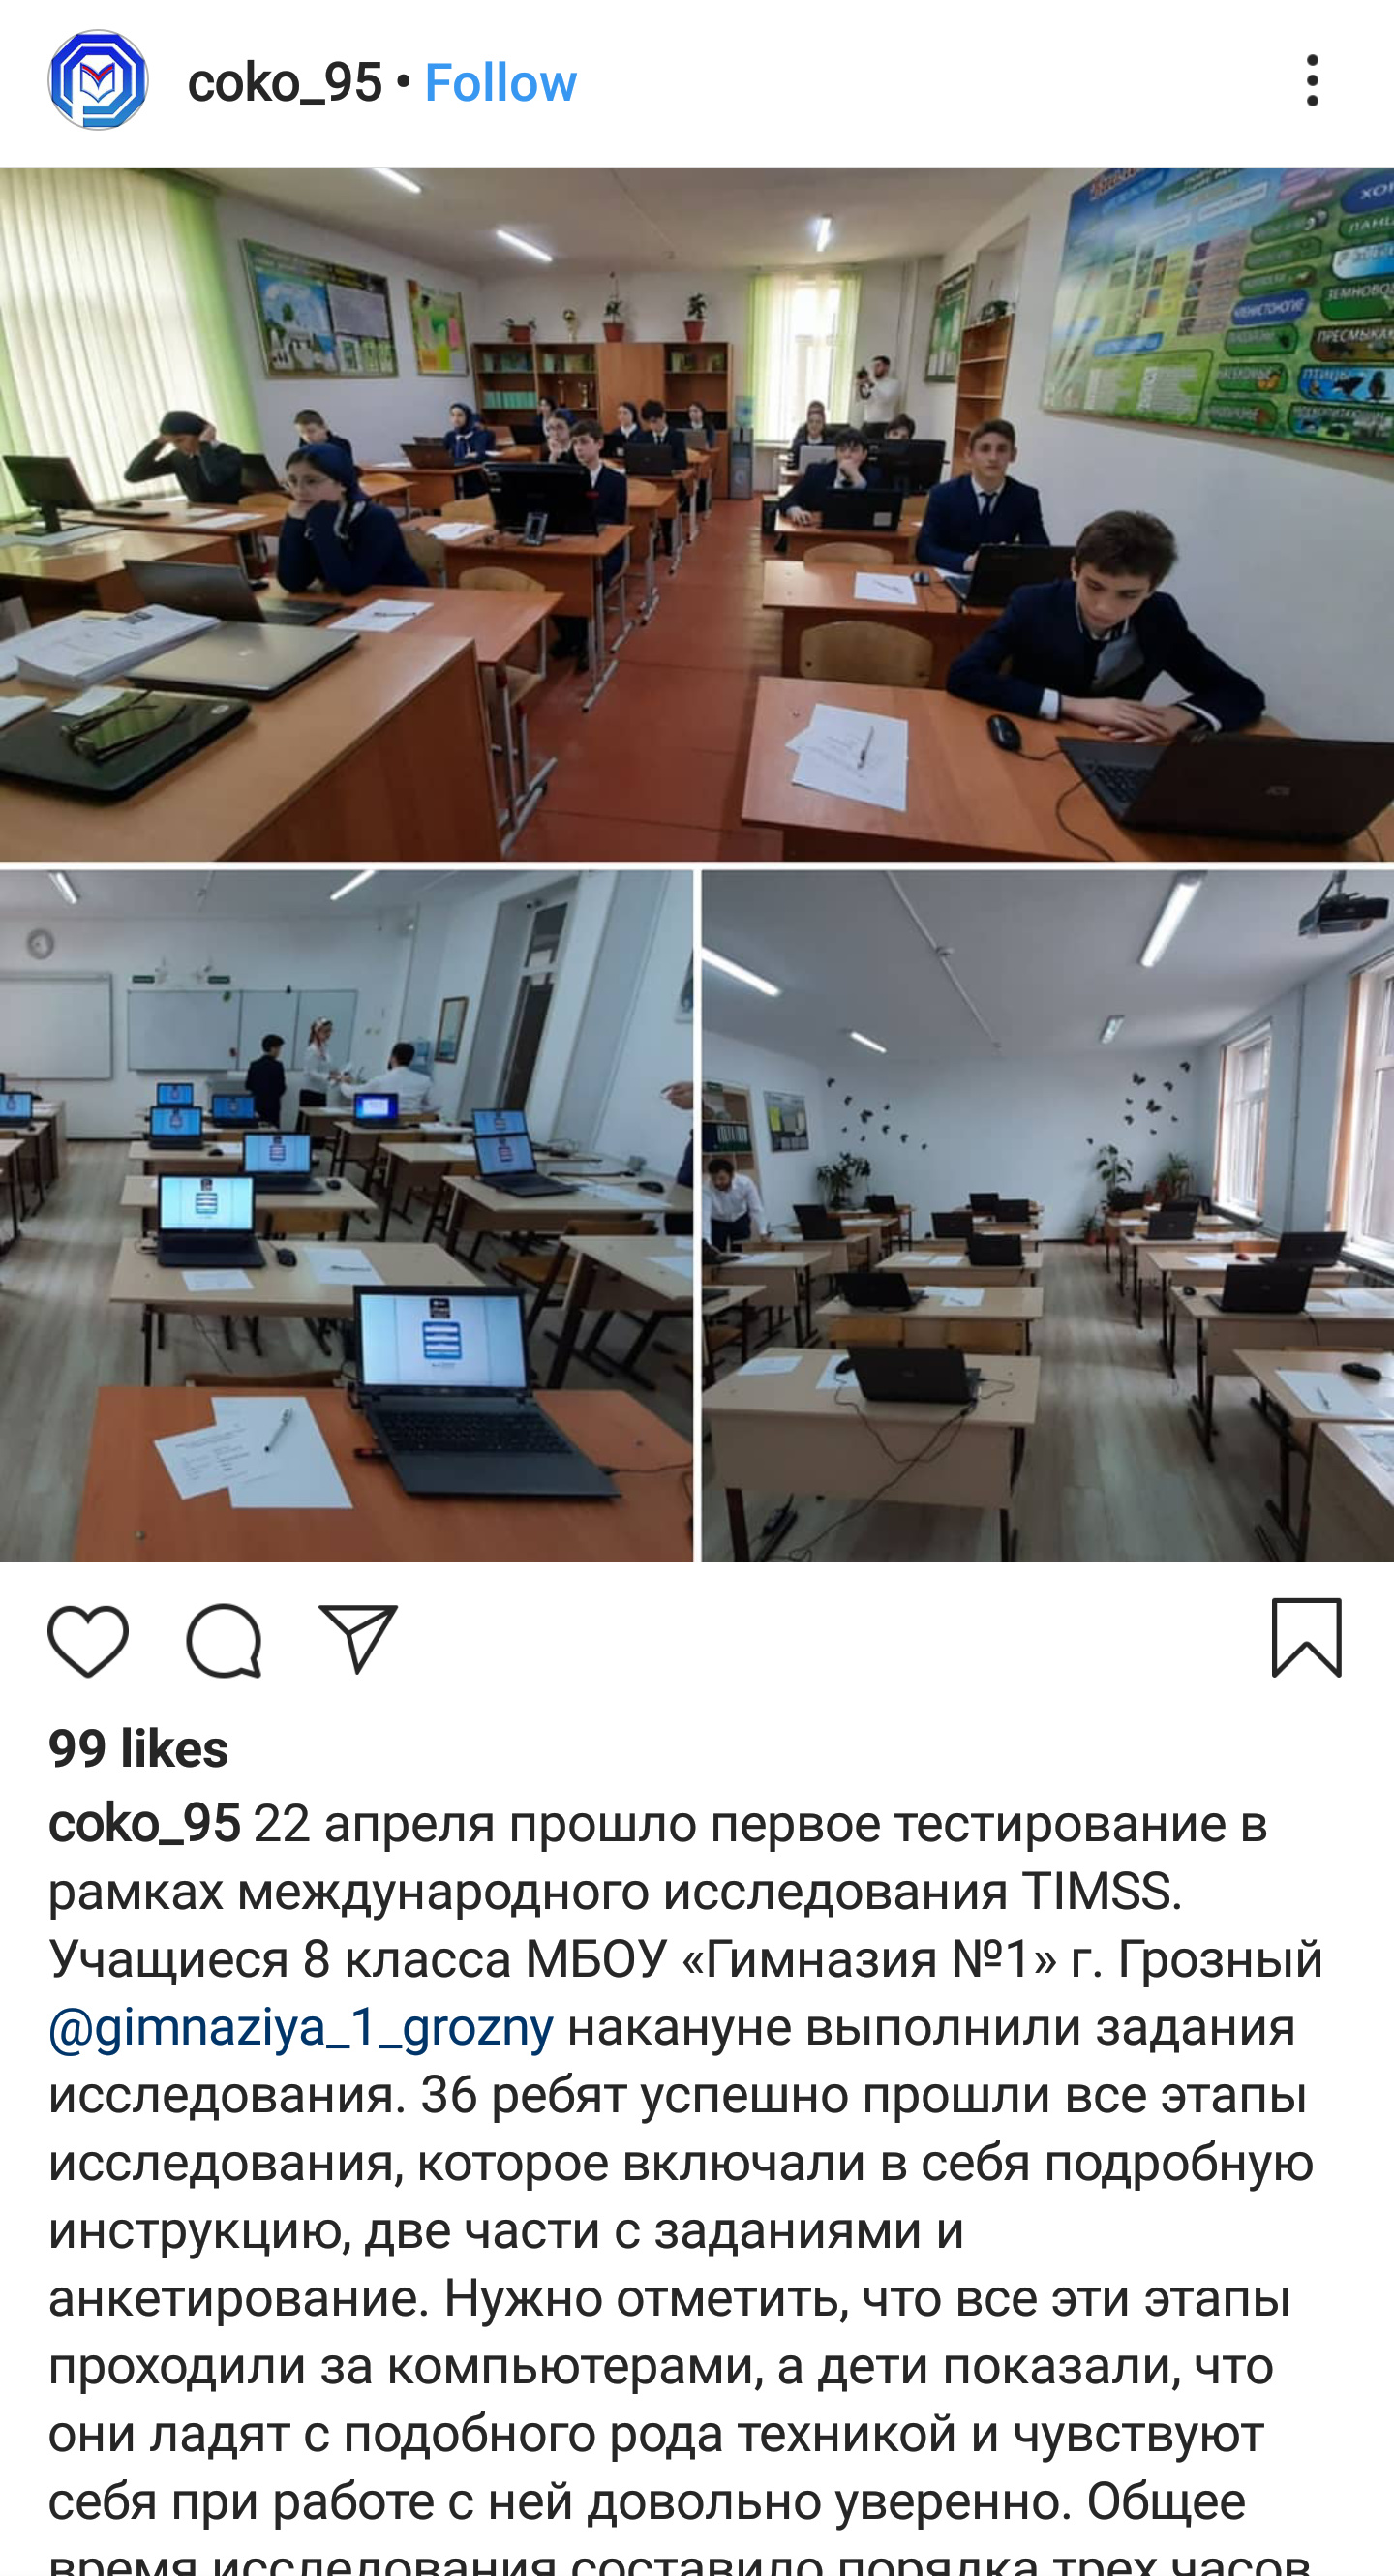 Russian students